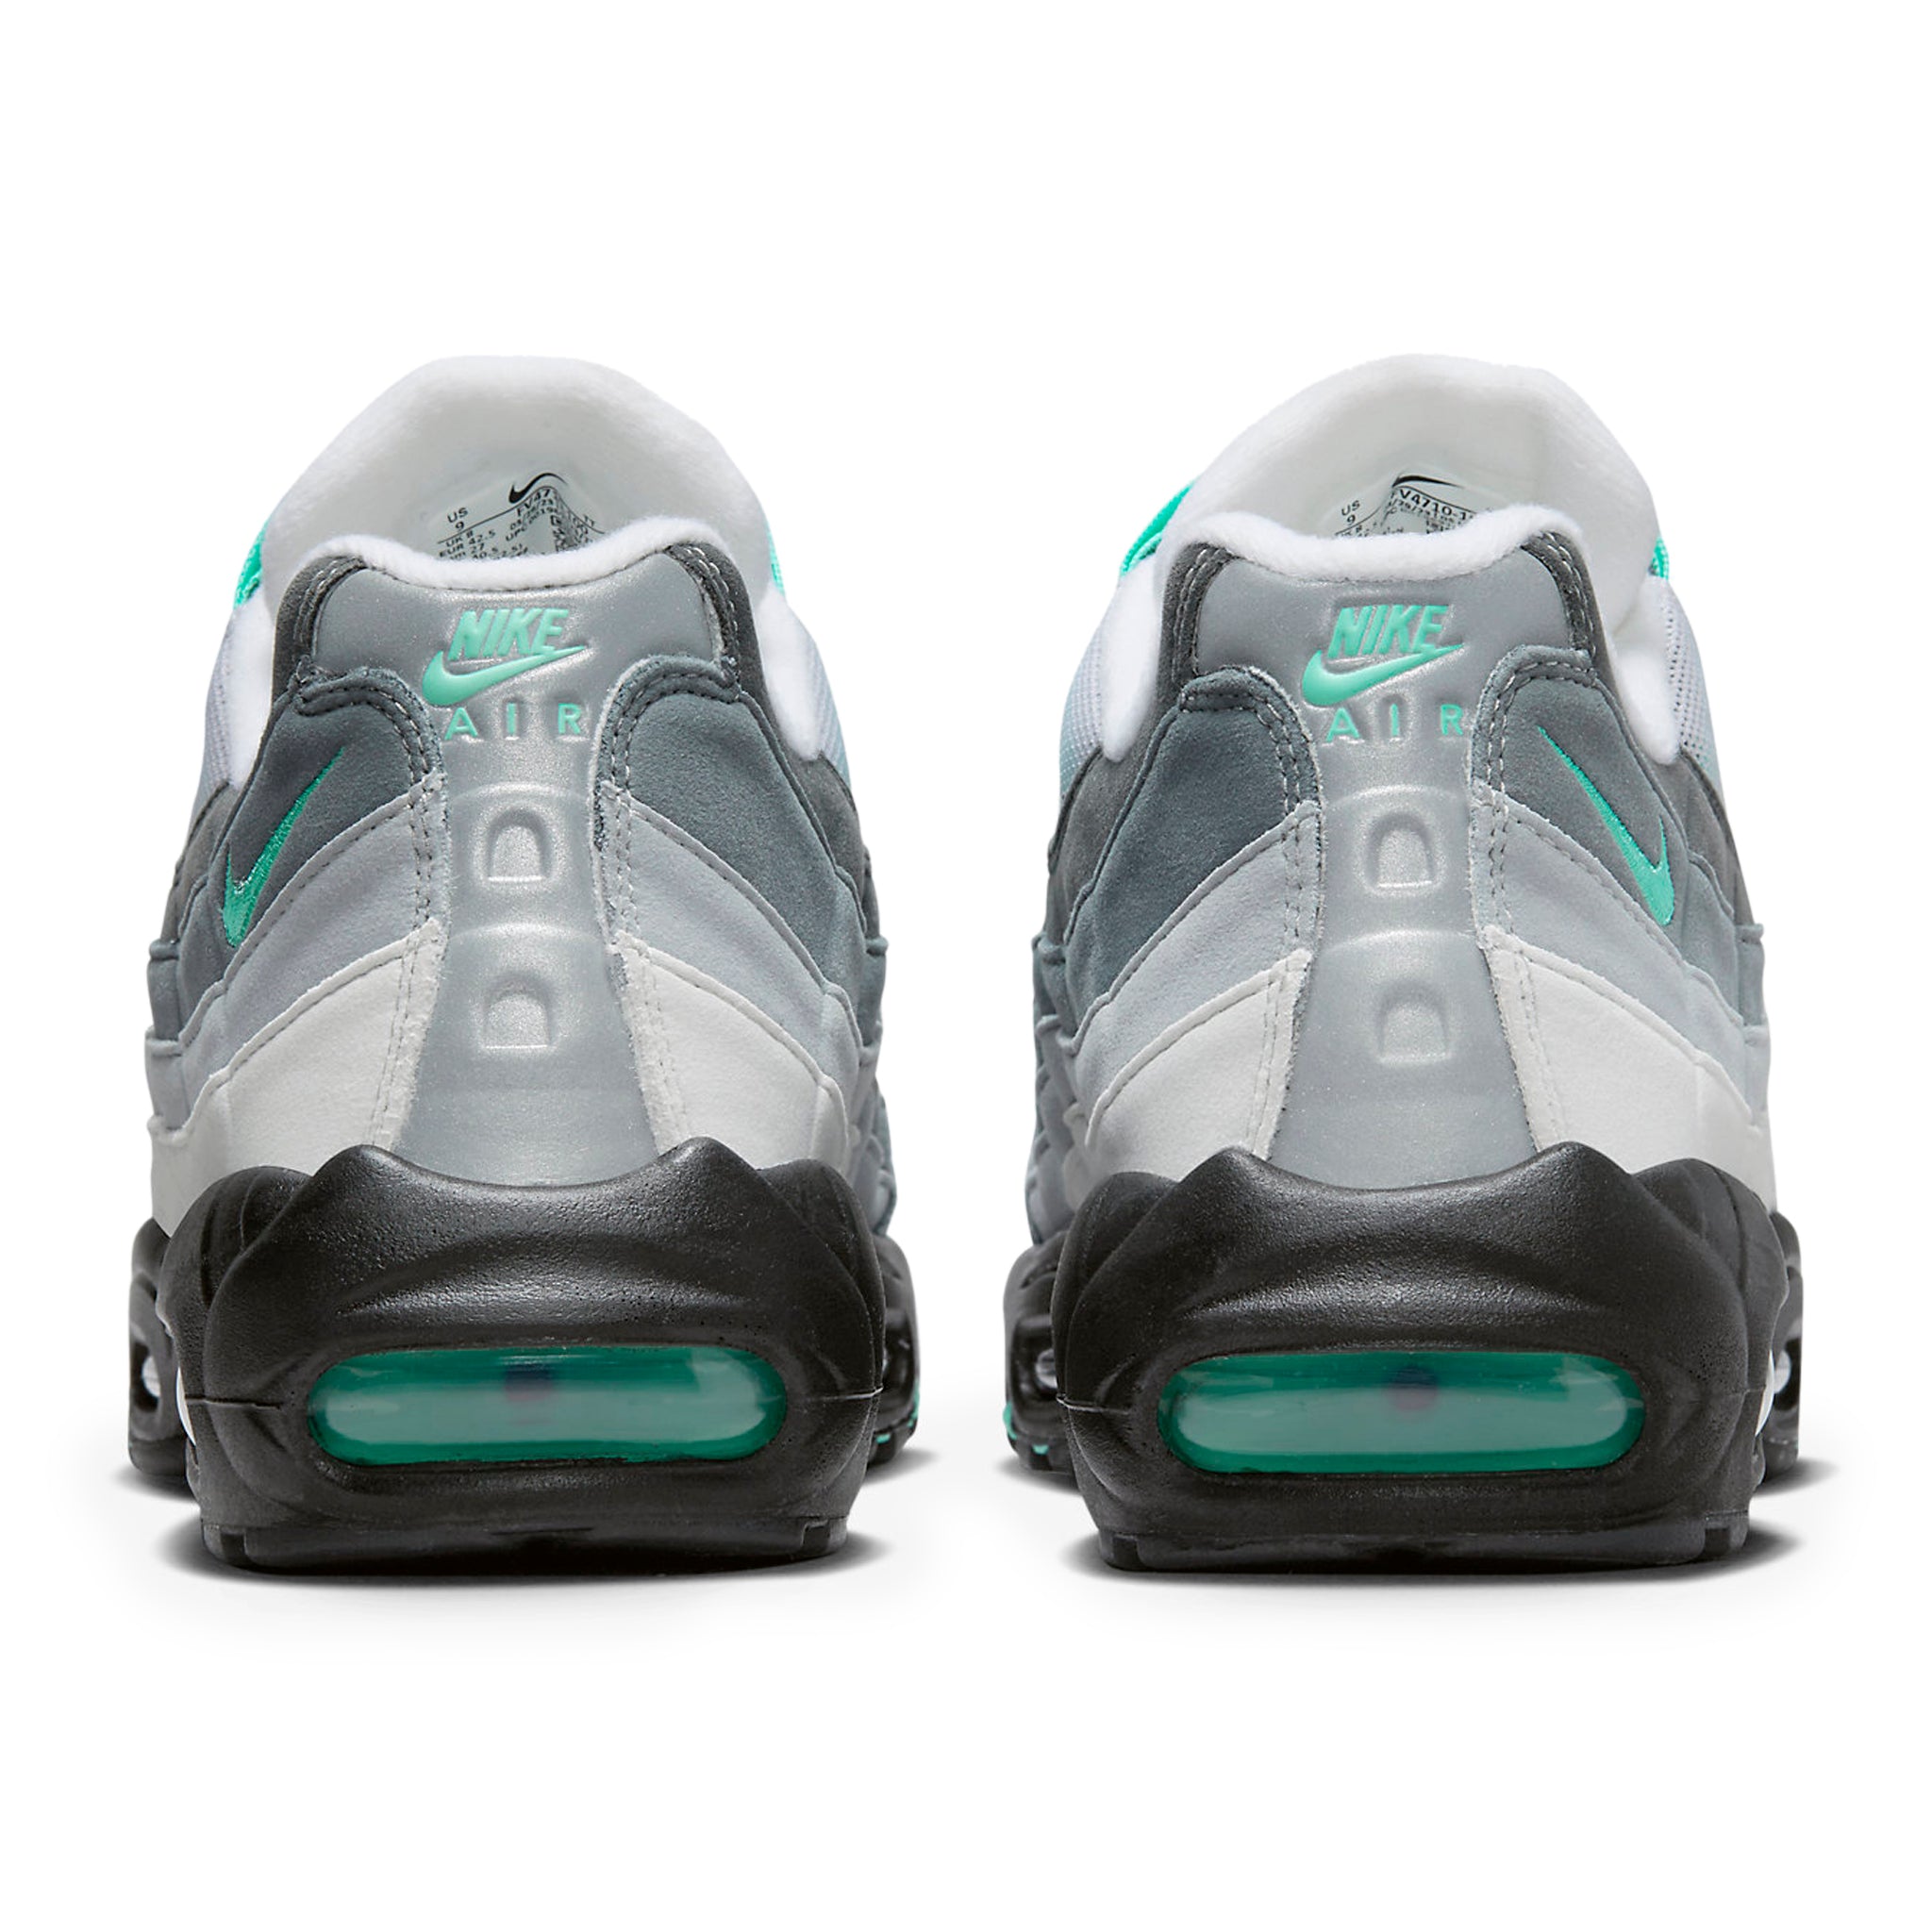 Back view of Nike Air Max 95 Hyper Turquoise FV4710-100